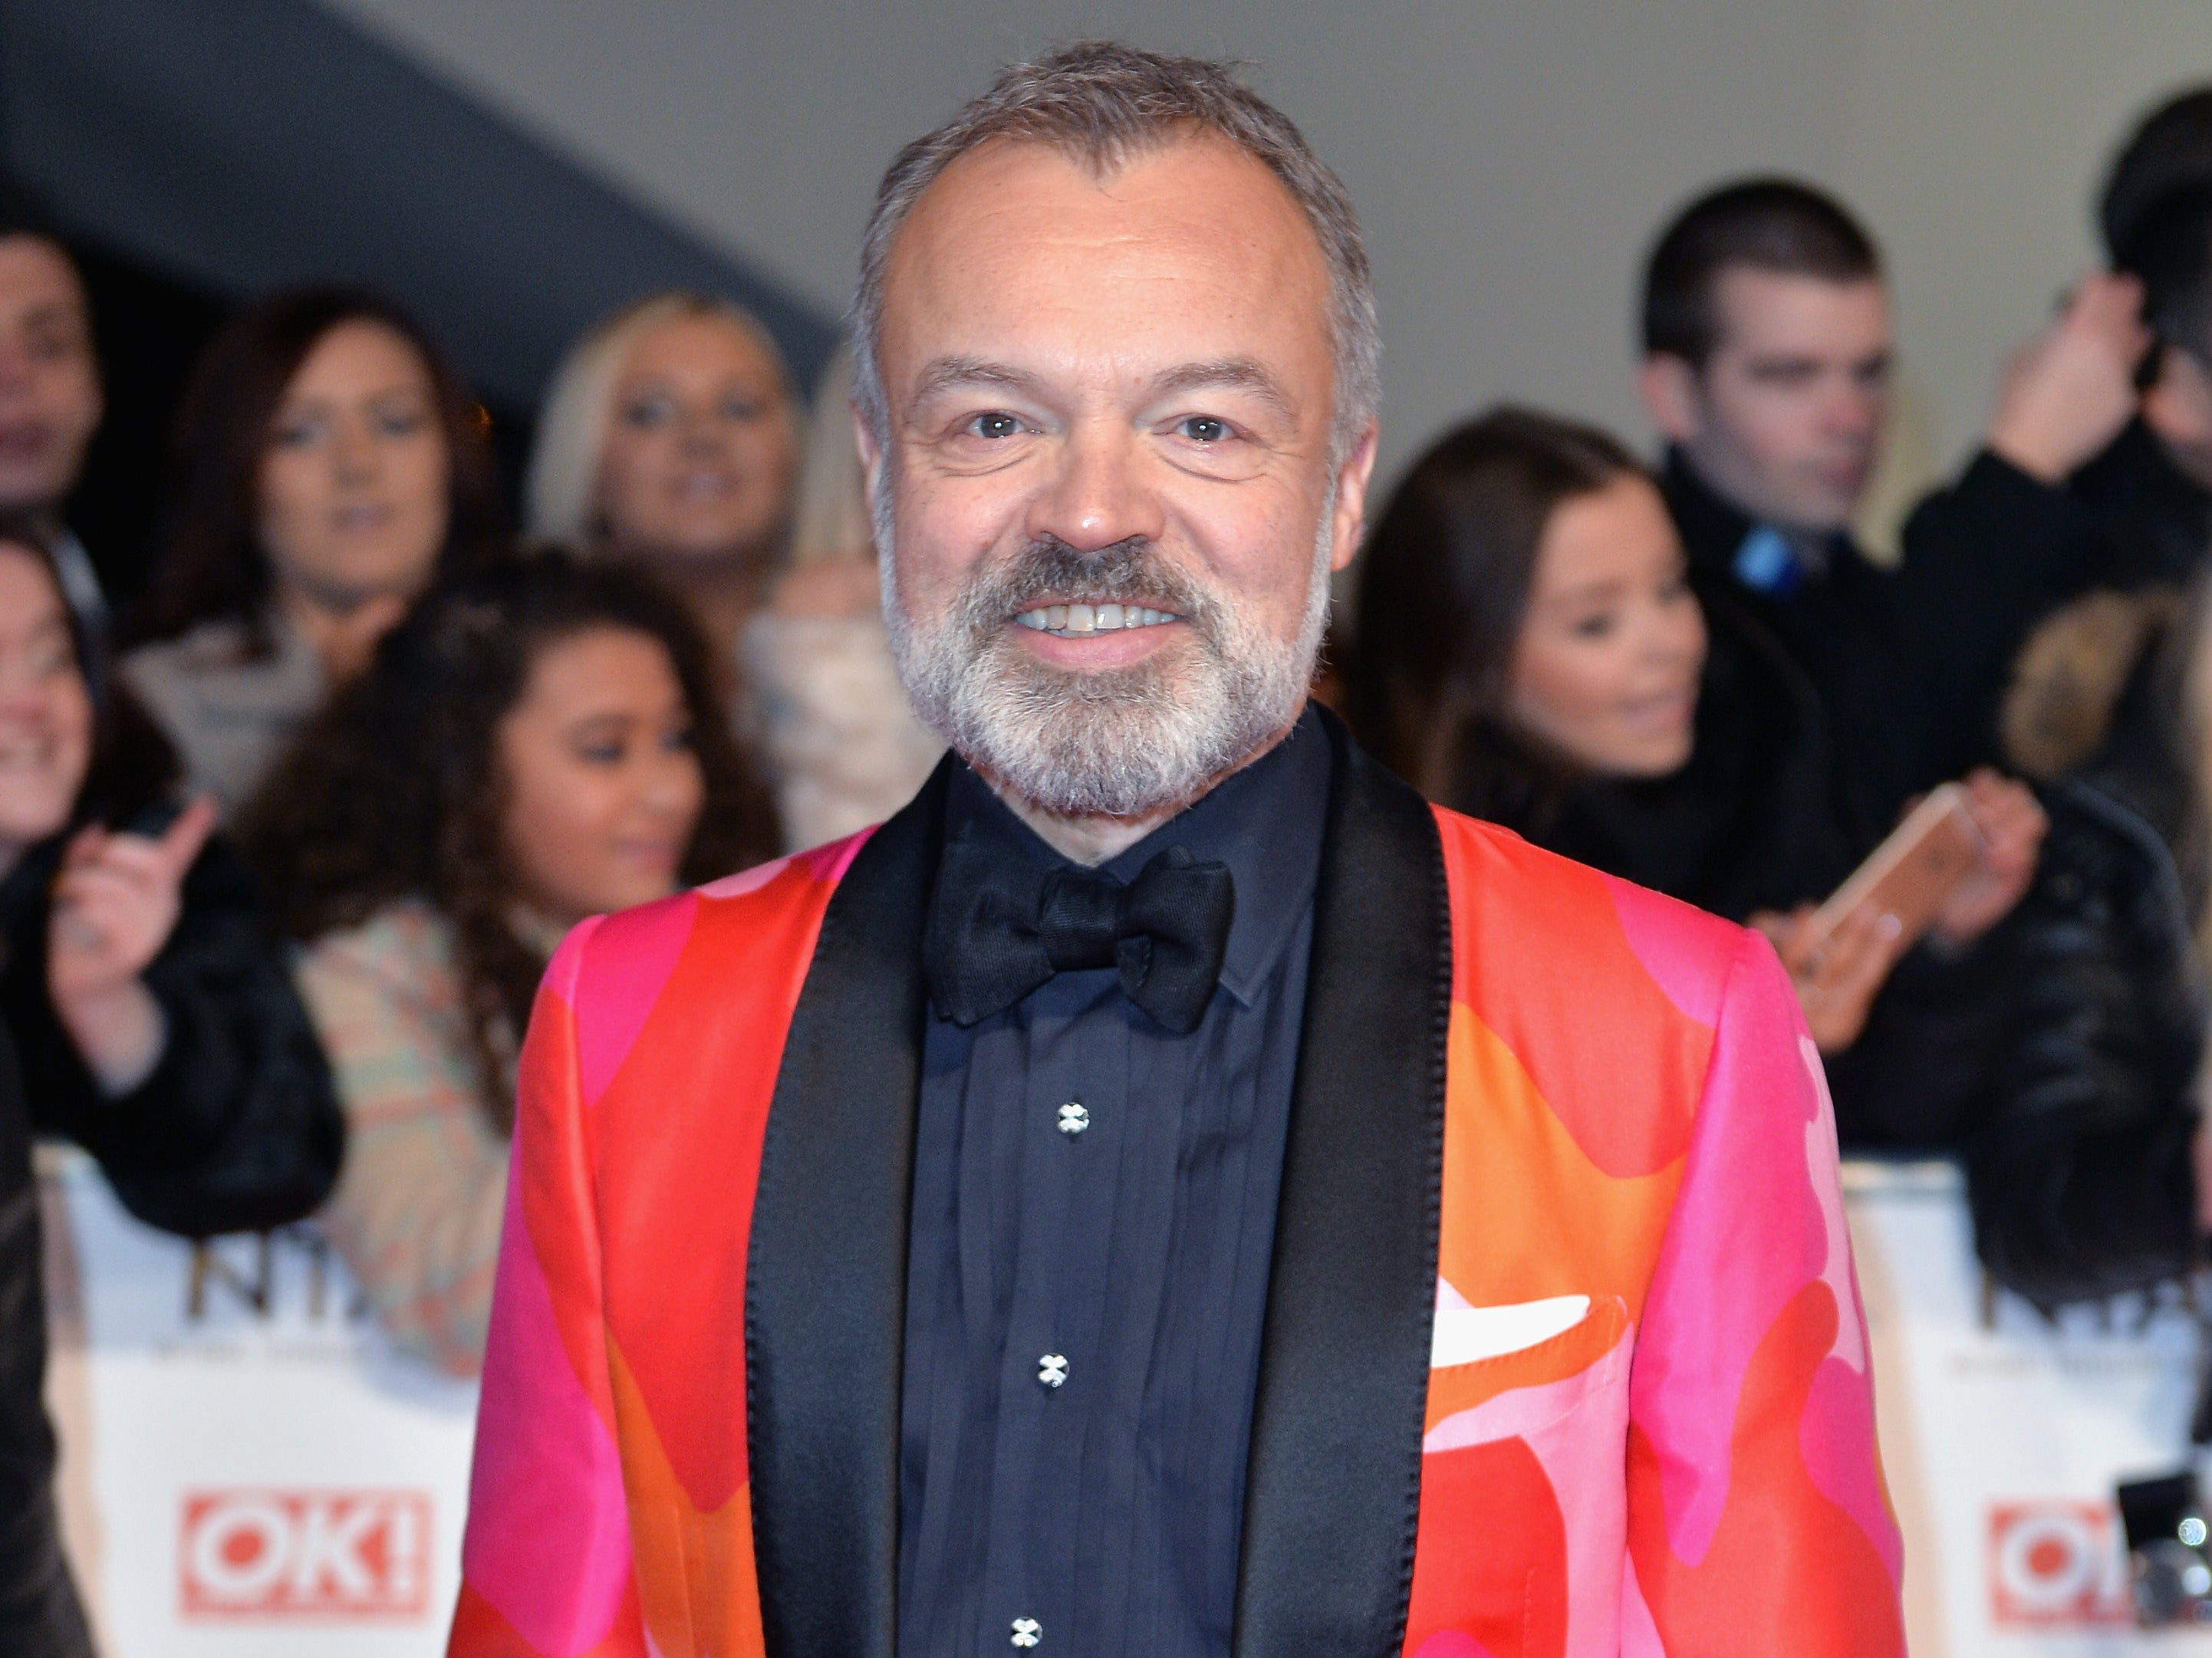 Graham Norton attends the 21st National Television Awards at The O2 Arena on January 20, 2016